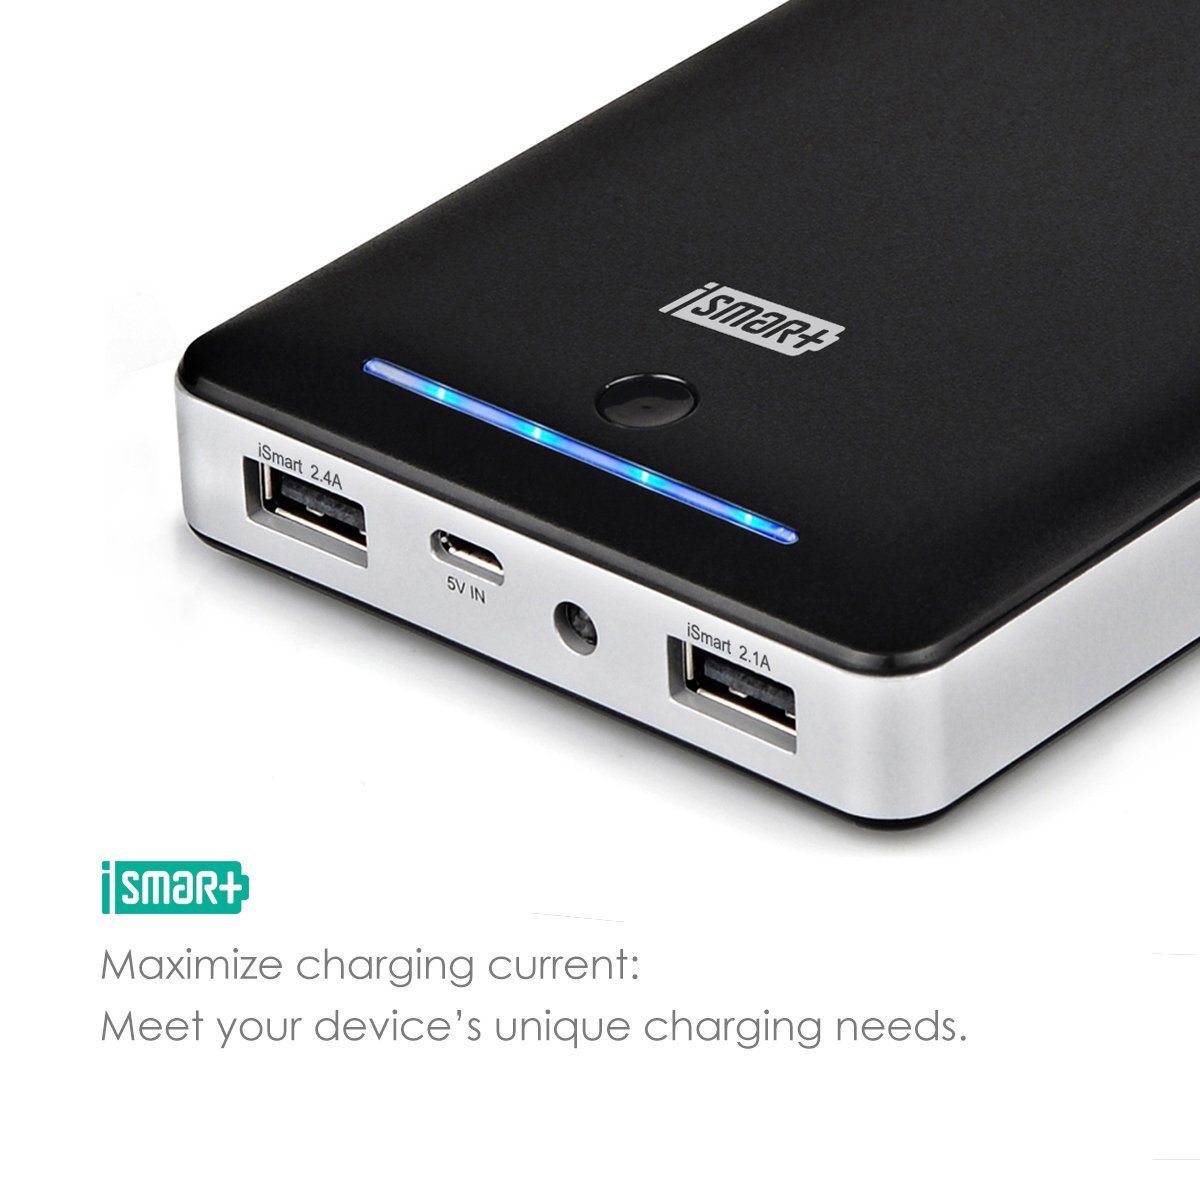 Most Powerful Portable Charger 06